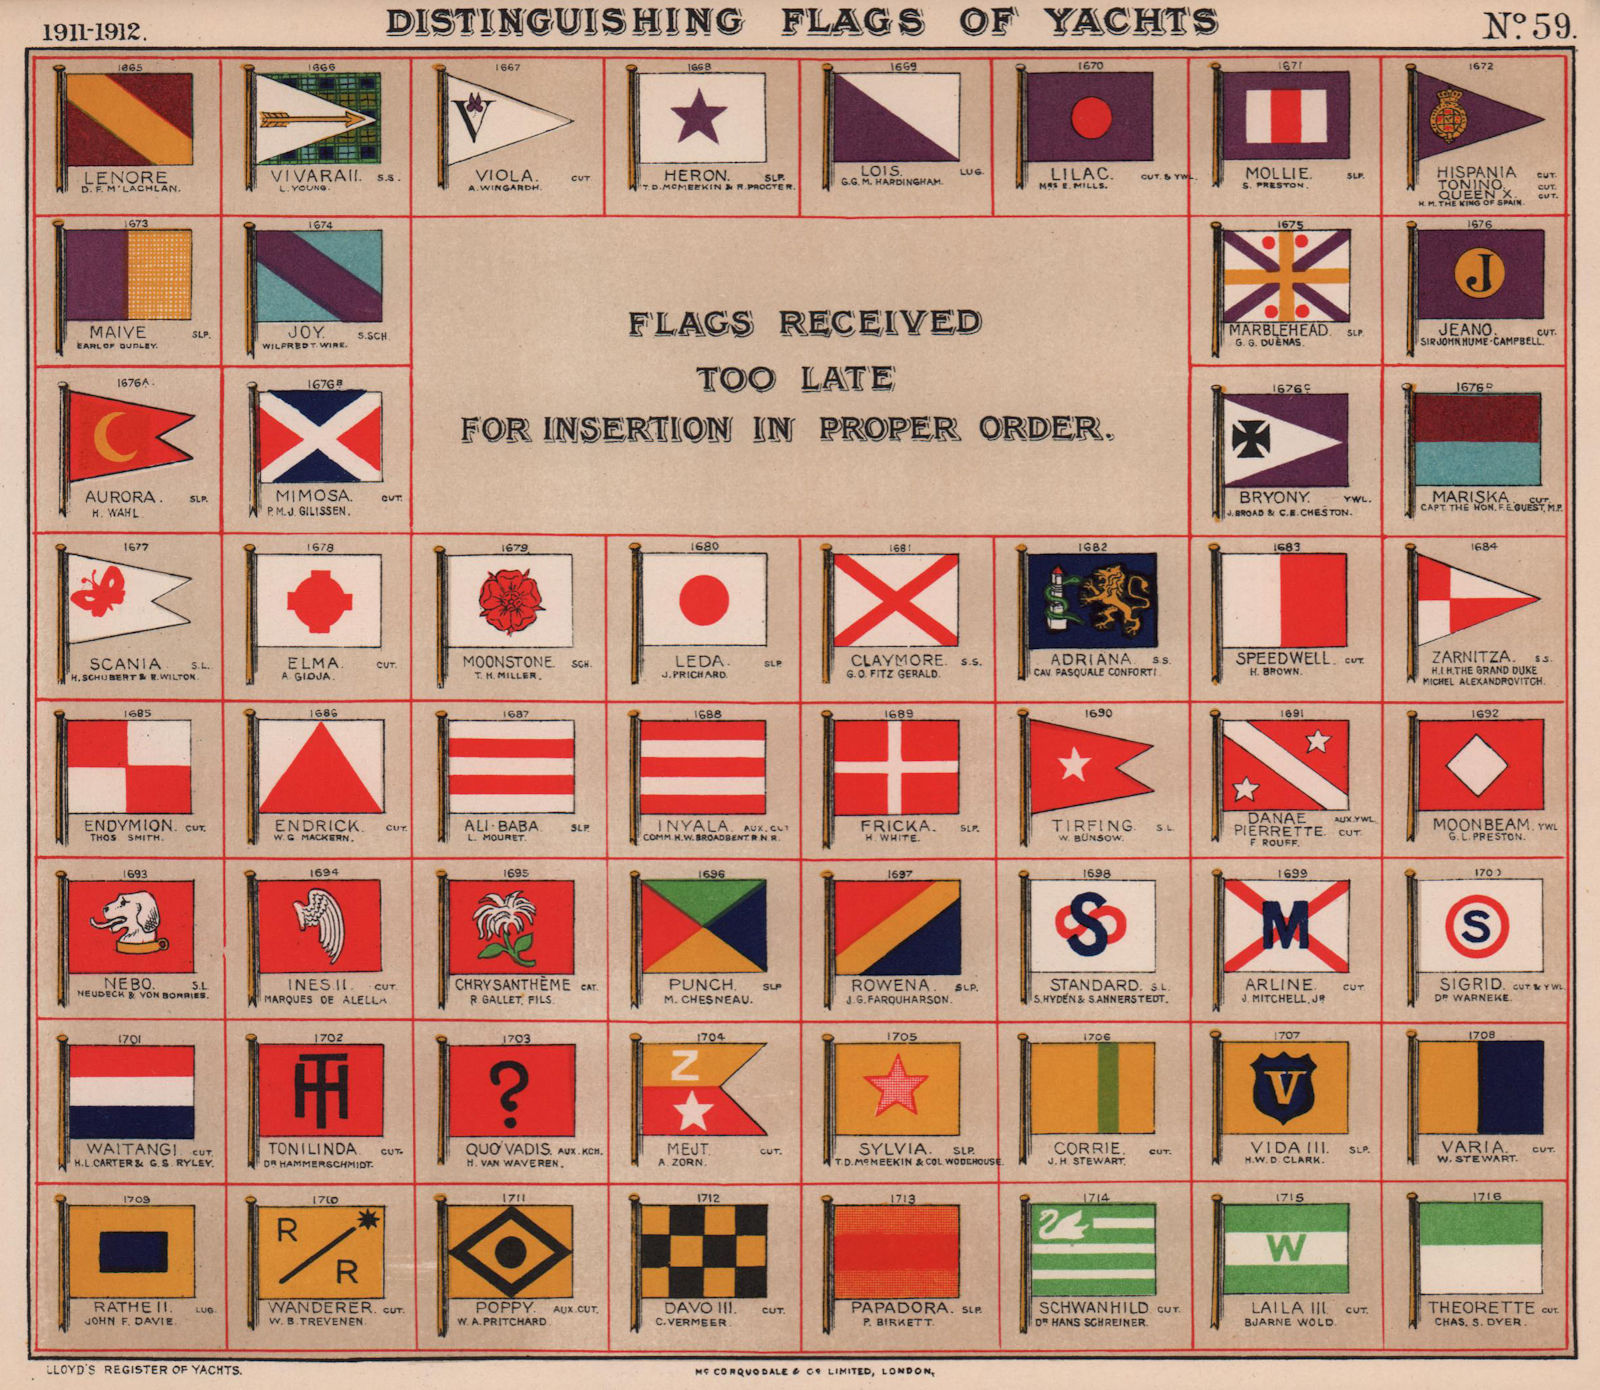 YACHT FLAGS Assorted colours. Flags received too late for ordered insertion 1911